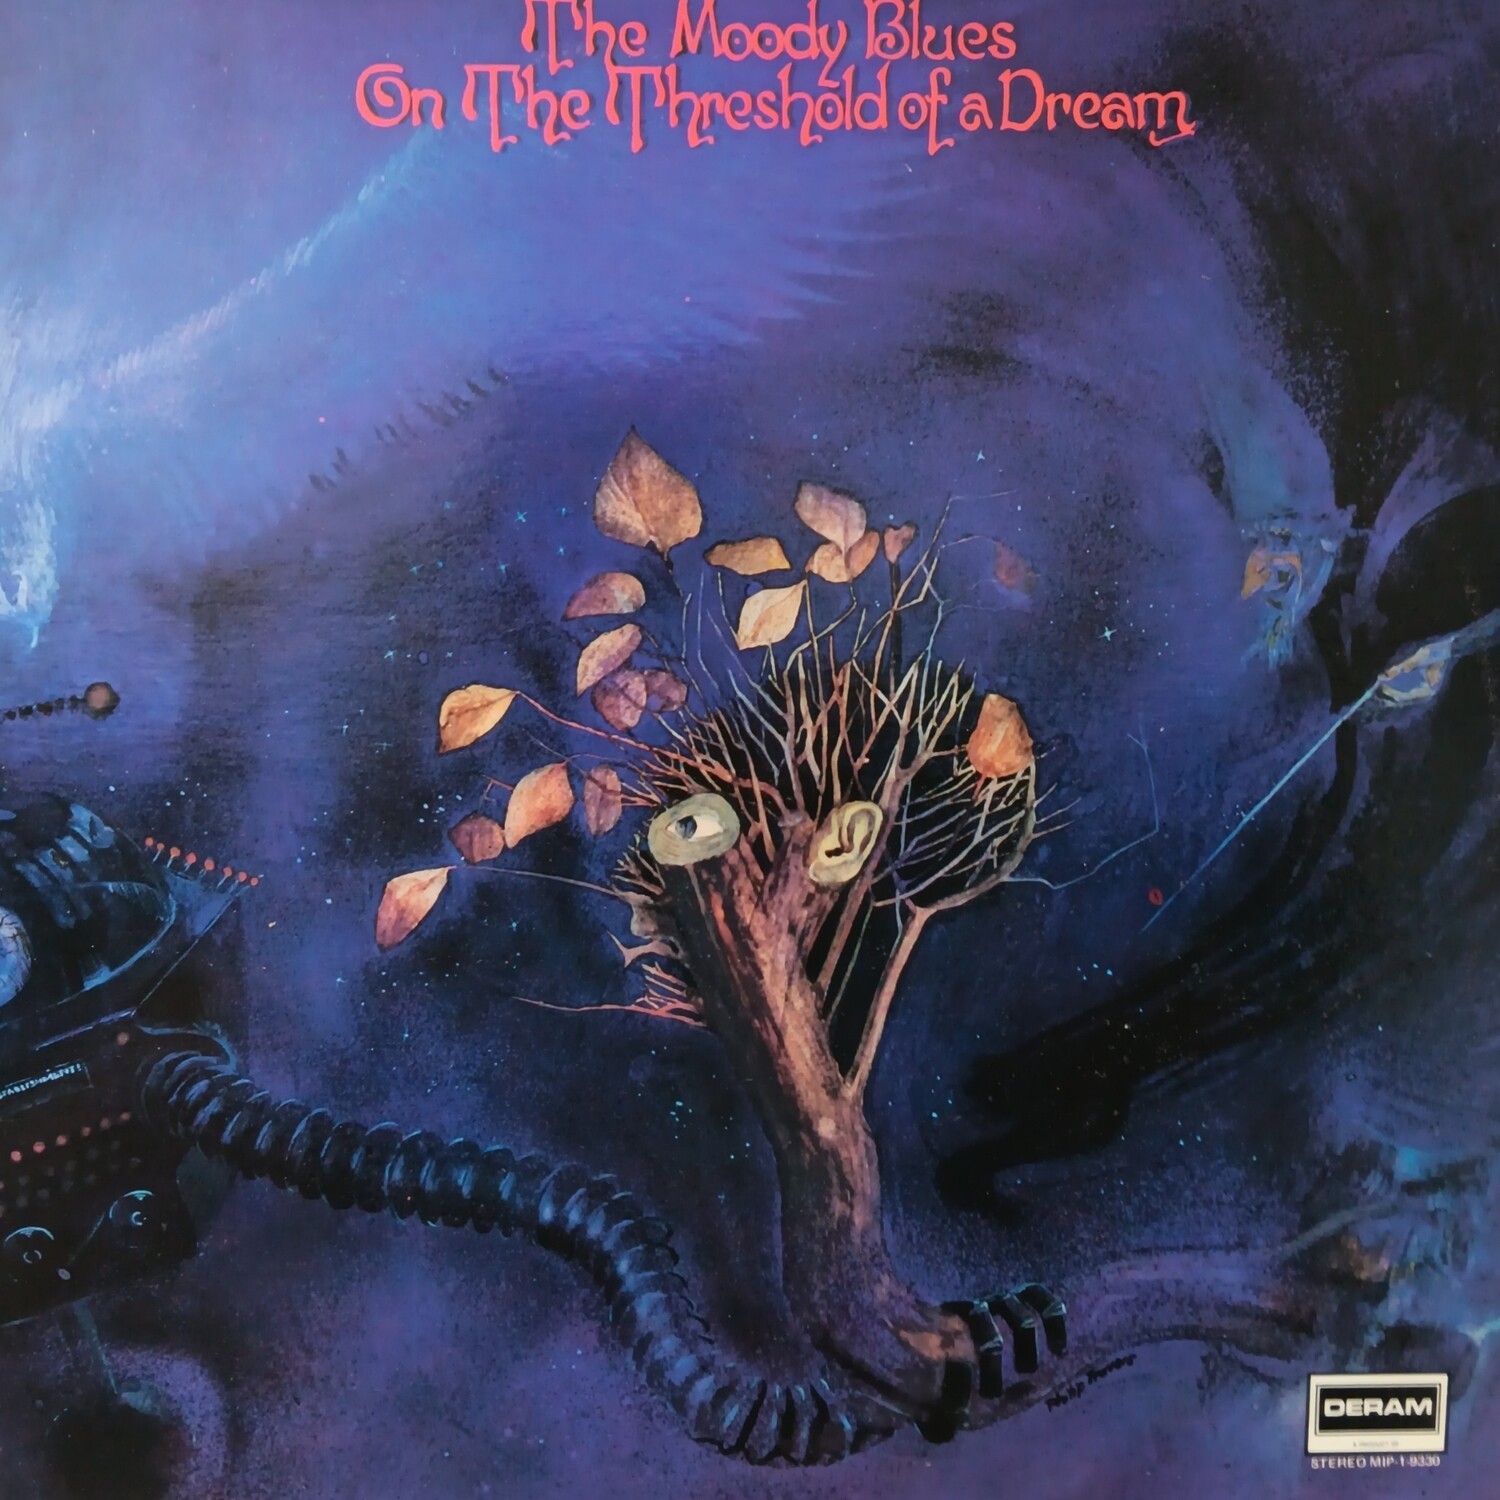 THE MOODY BLUES - On the threshold of a dream